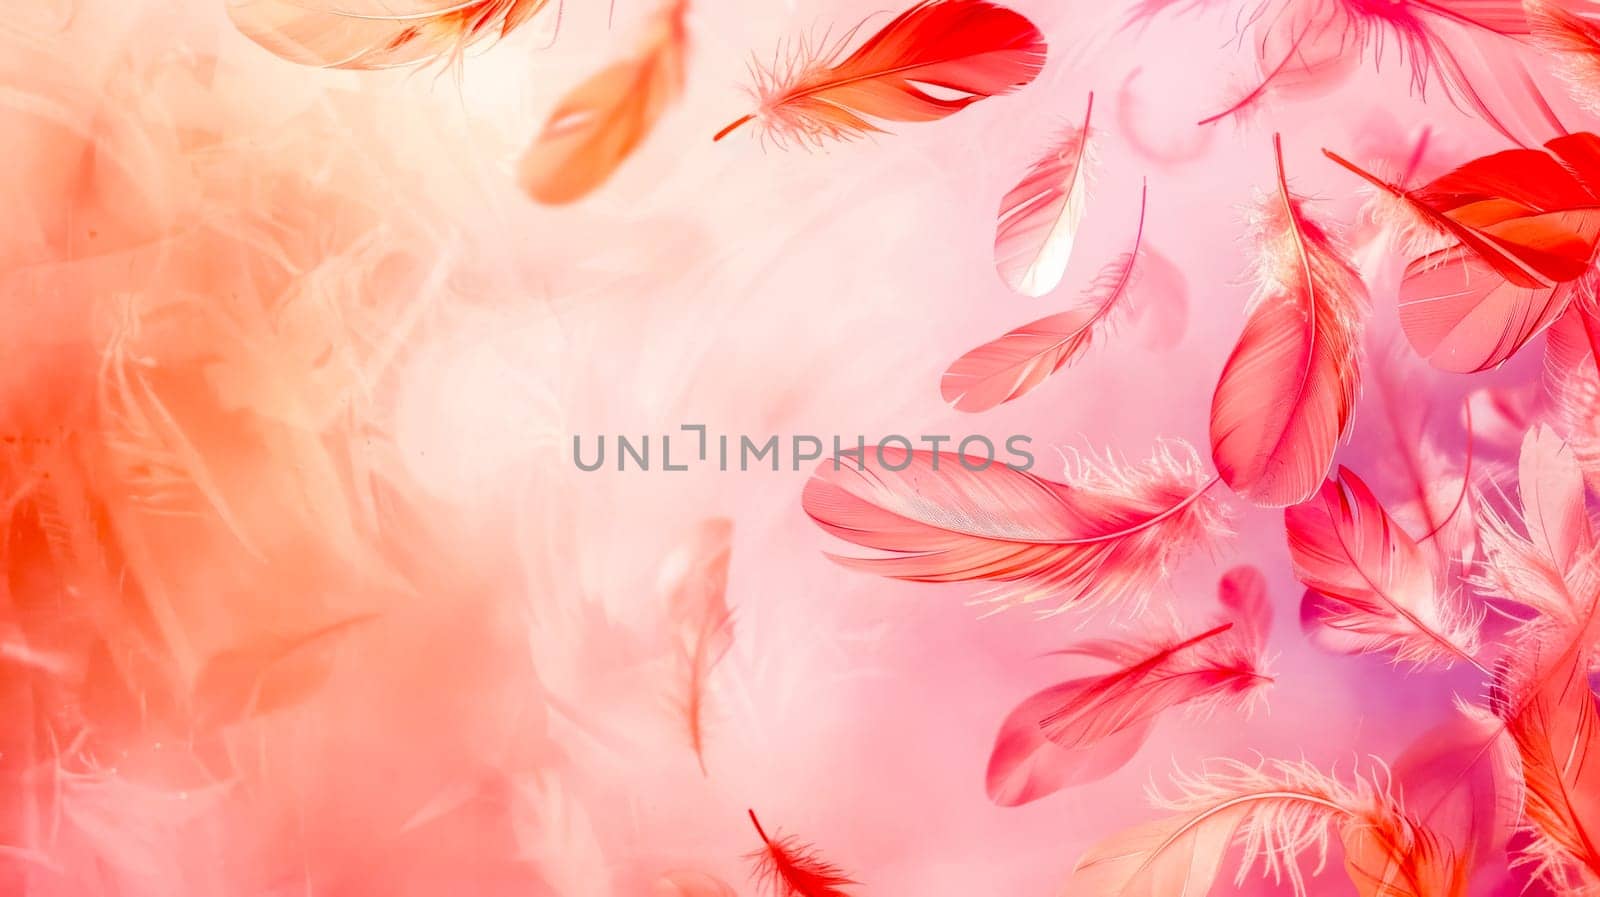 Soft pink and red feathers gently floating, perfect for dreamy or romantic themes by Edophoto